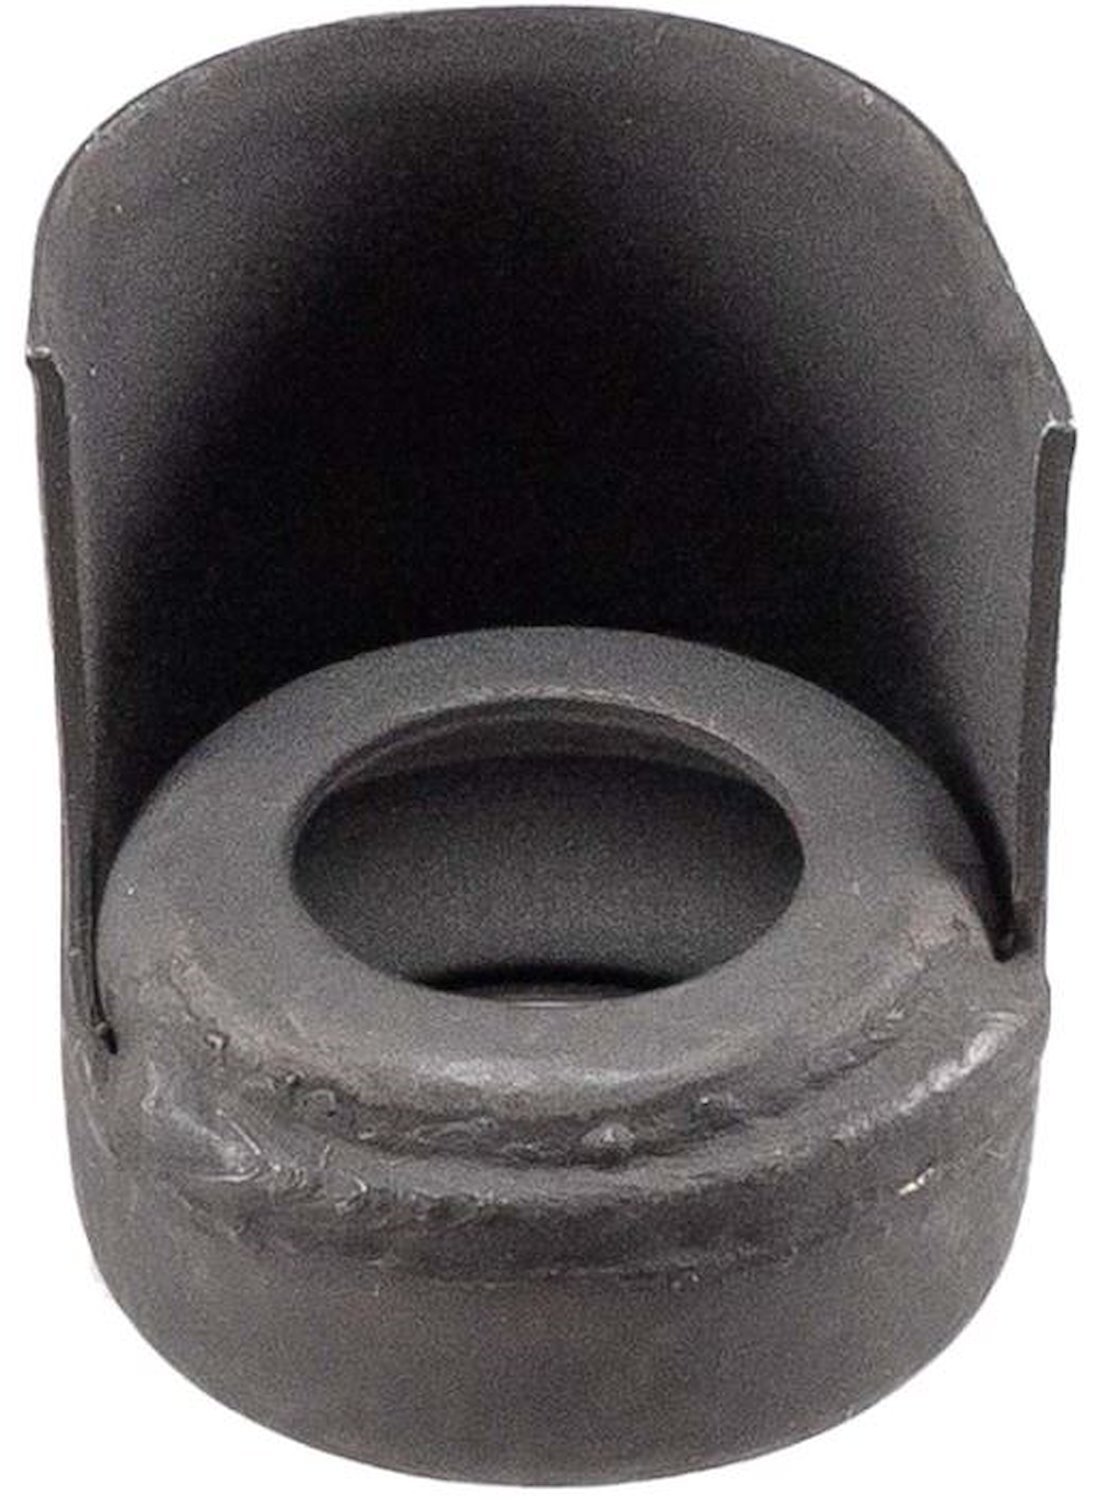 Oil Pressure Relief Valve Deflector for GM LS-Series Engines